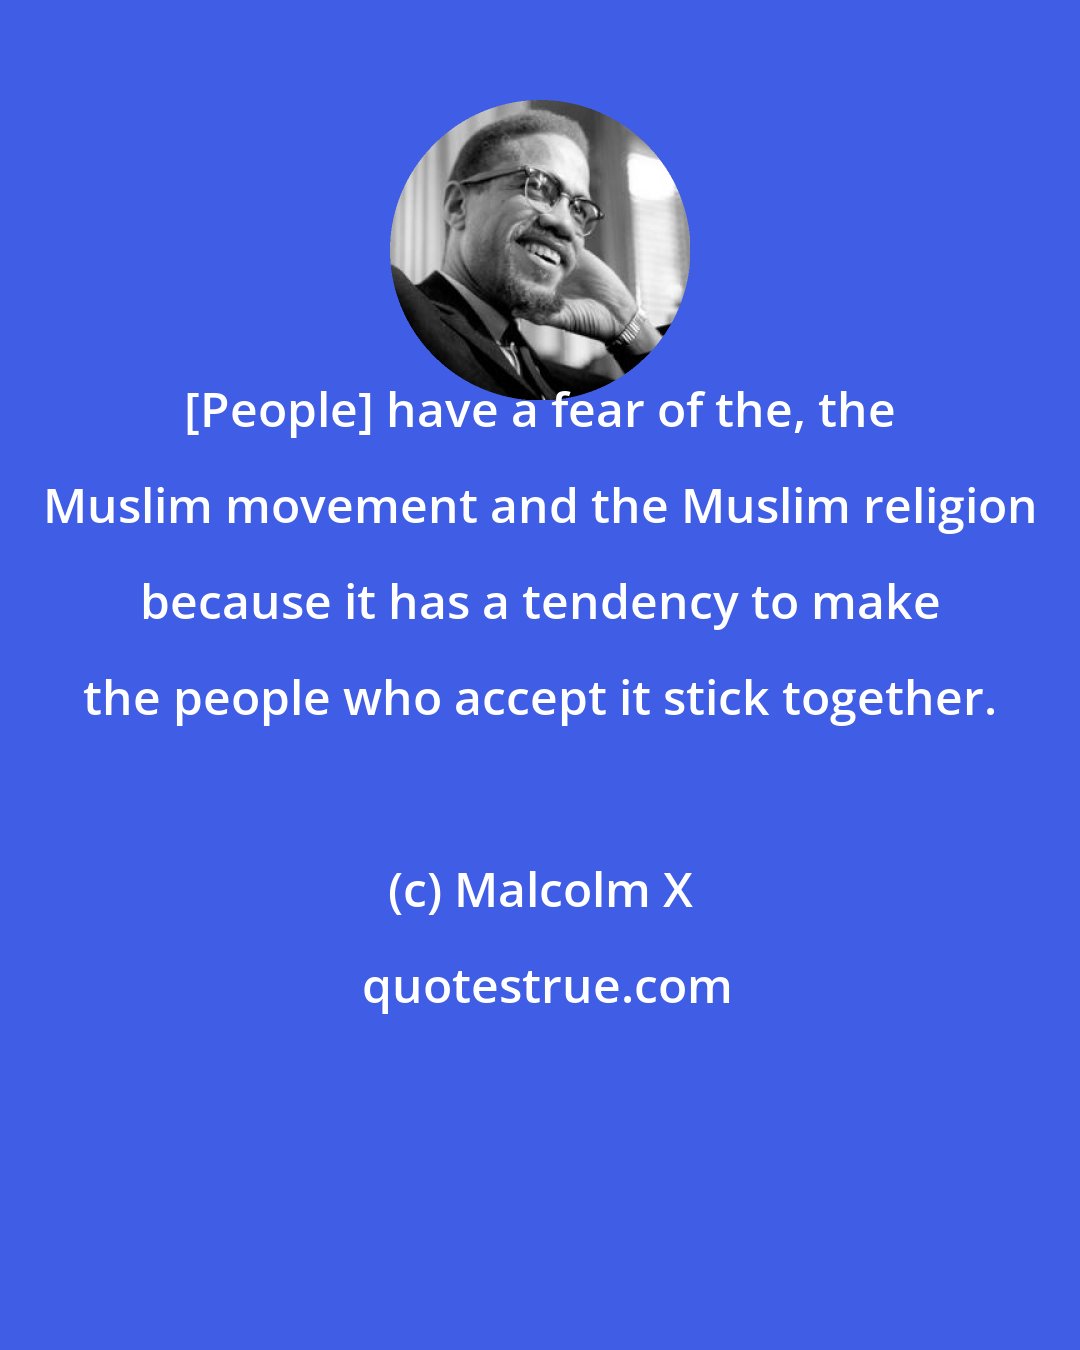 Malcolm X: [People] have a fear of the, the Muslim movement and the Muslim religion because it has a tendency to make the people who accept it stick together.